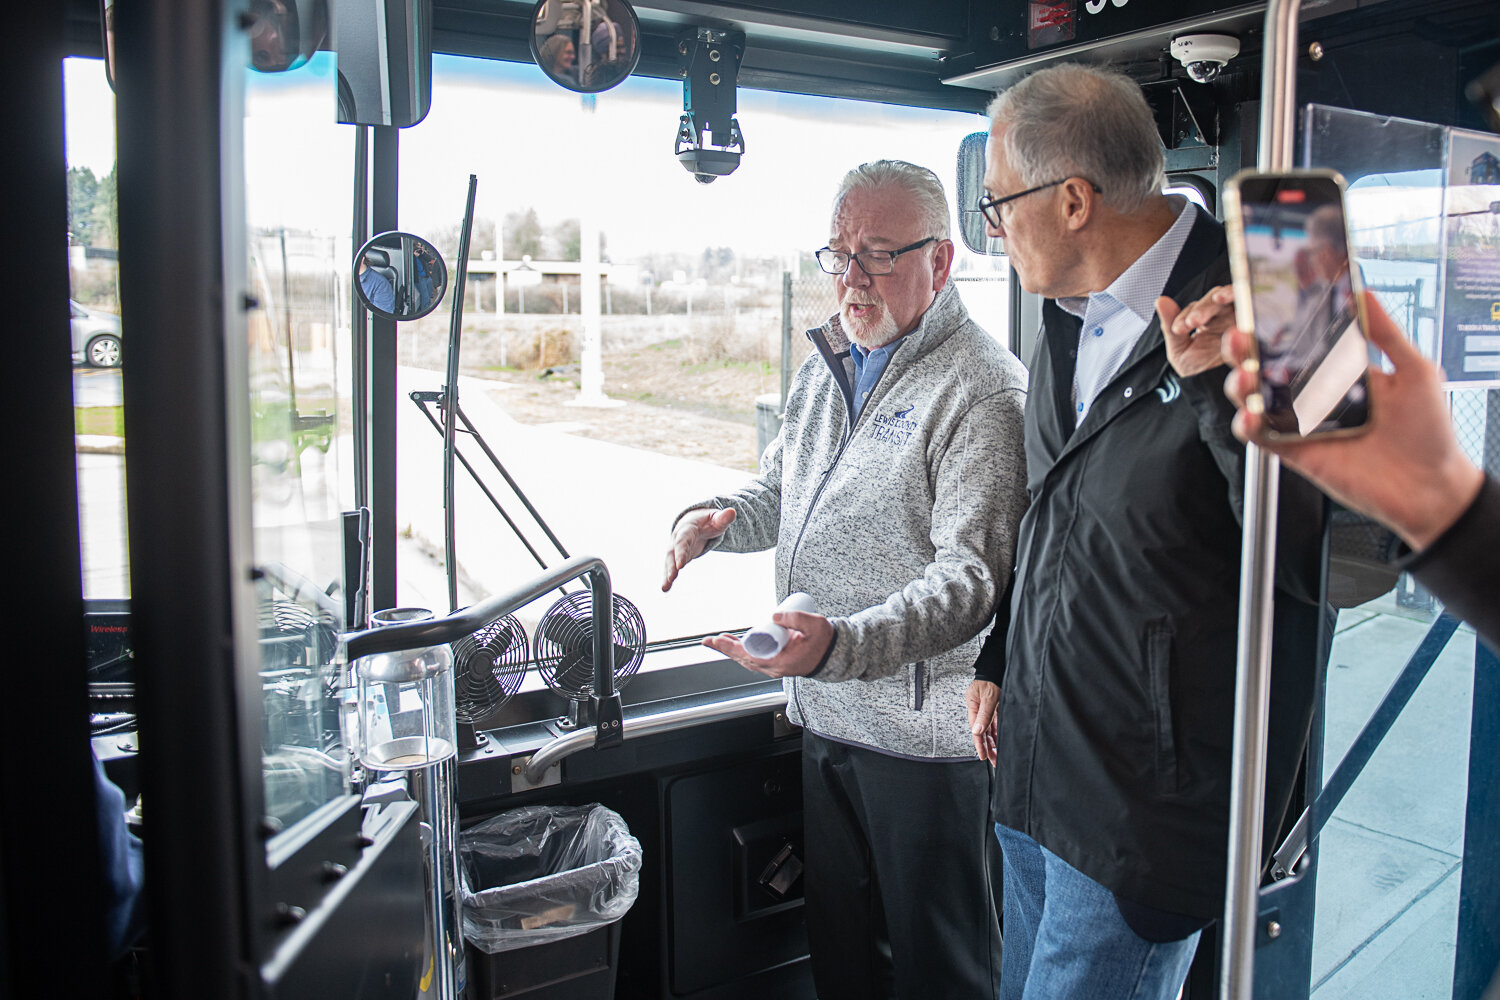 Lewis County Transit Executive Director Joe Clark, left, explains the system's process of touch charging to Gov. Jay Inslee aboard an all electric bus on Friday, Jan. 19.